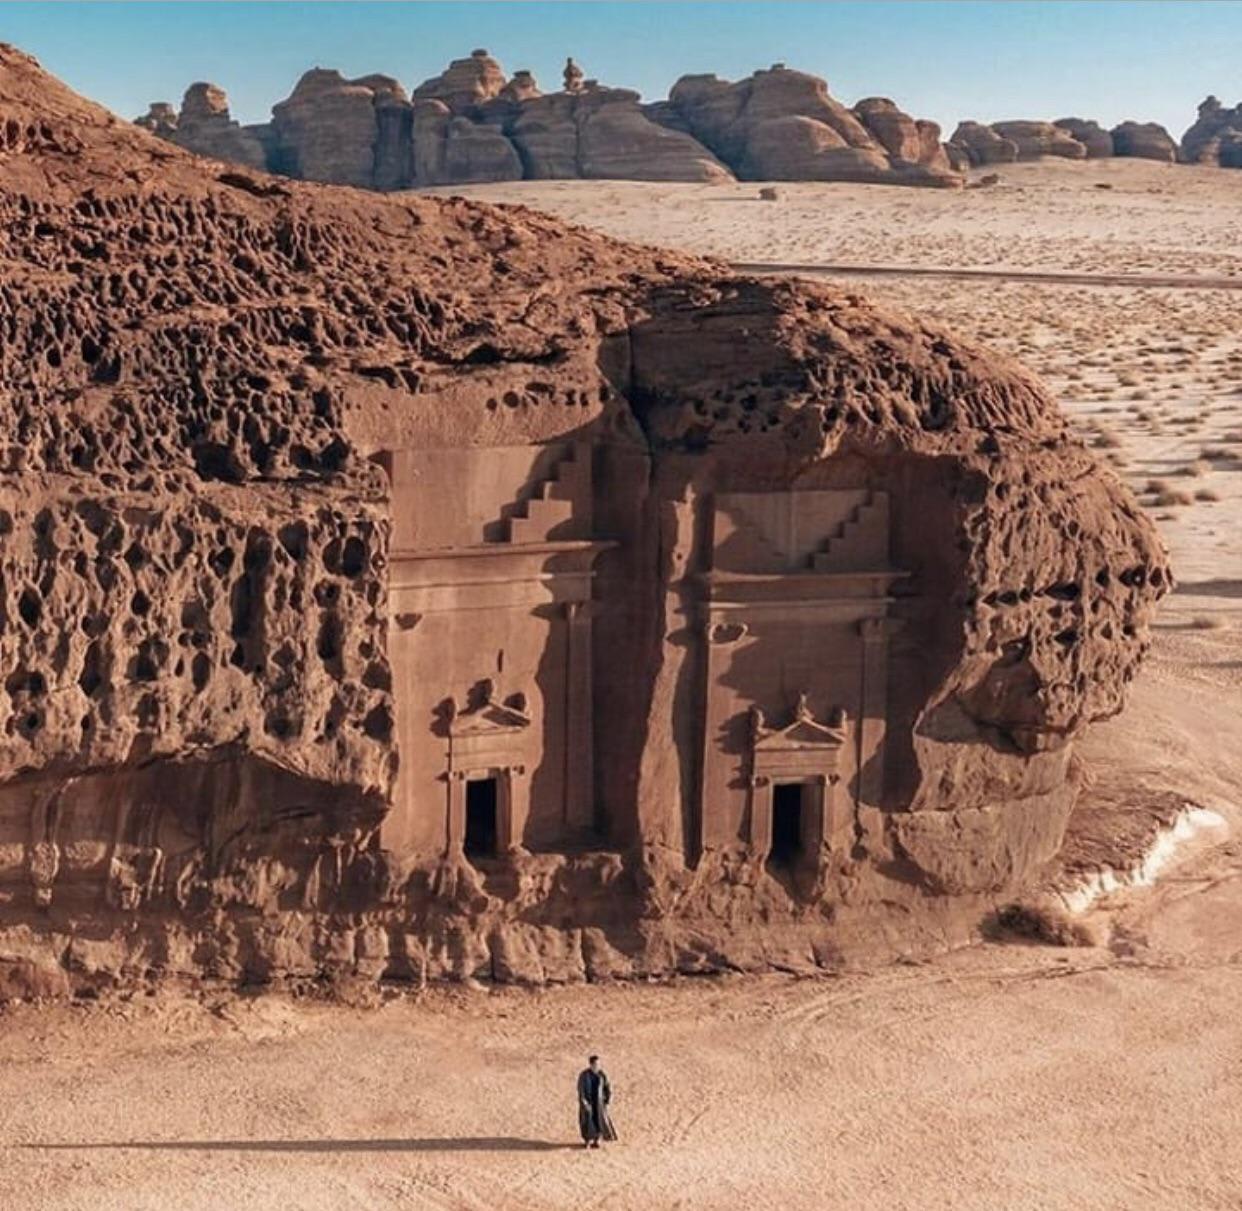 Ancient tombs built into the rock in the Arabian desert